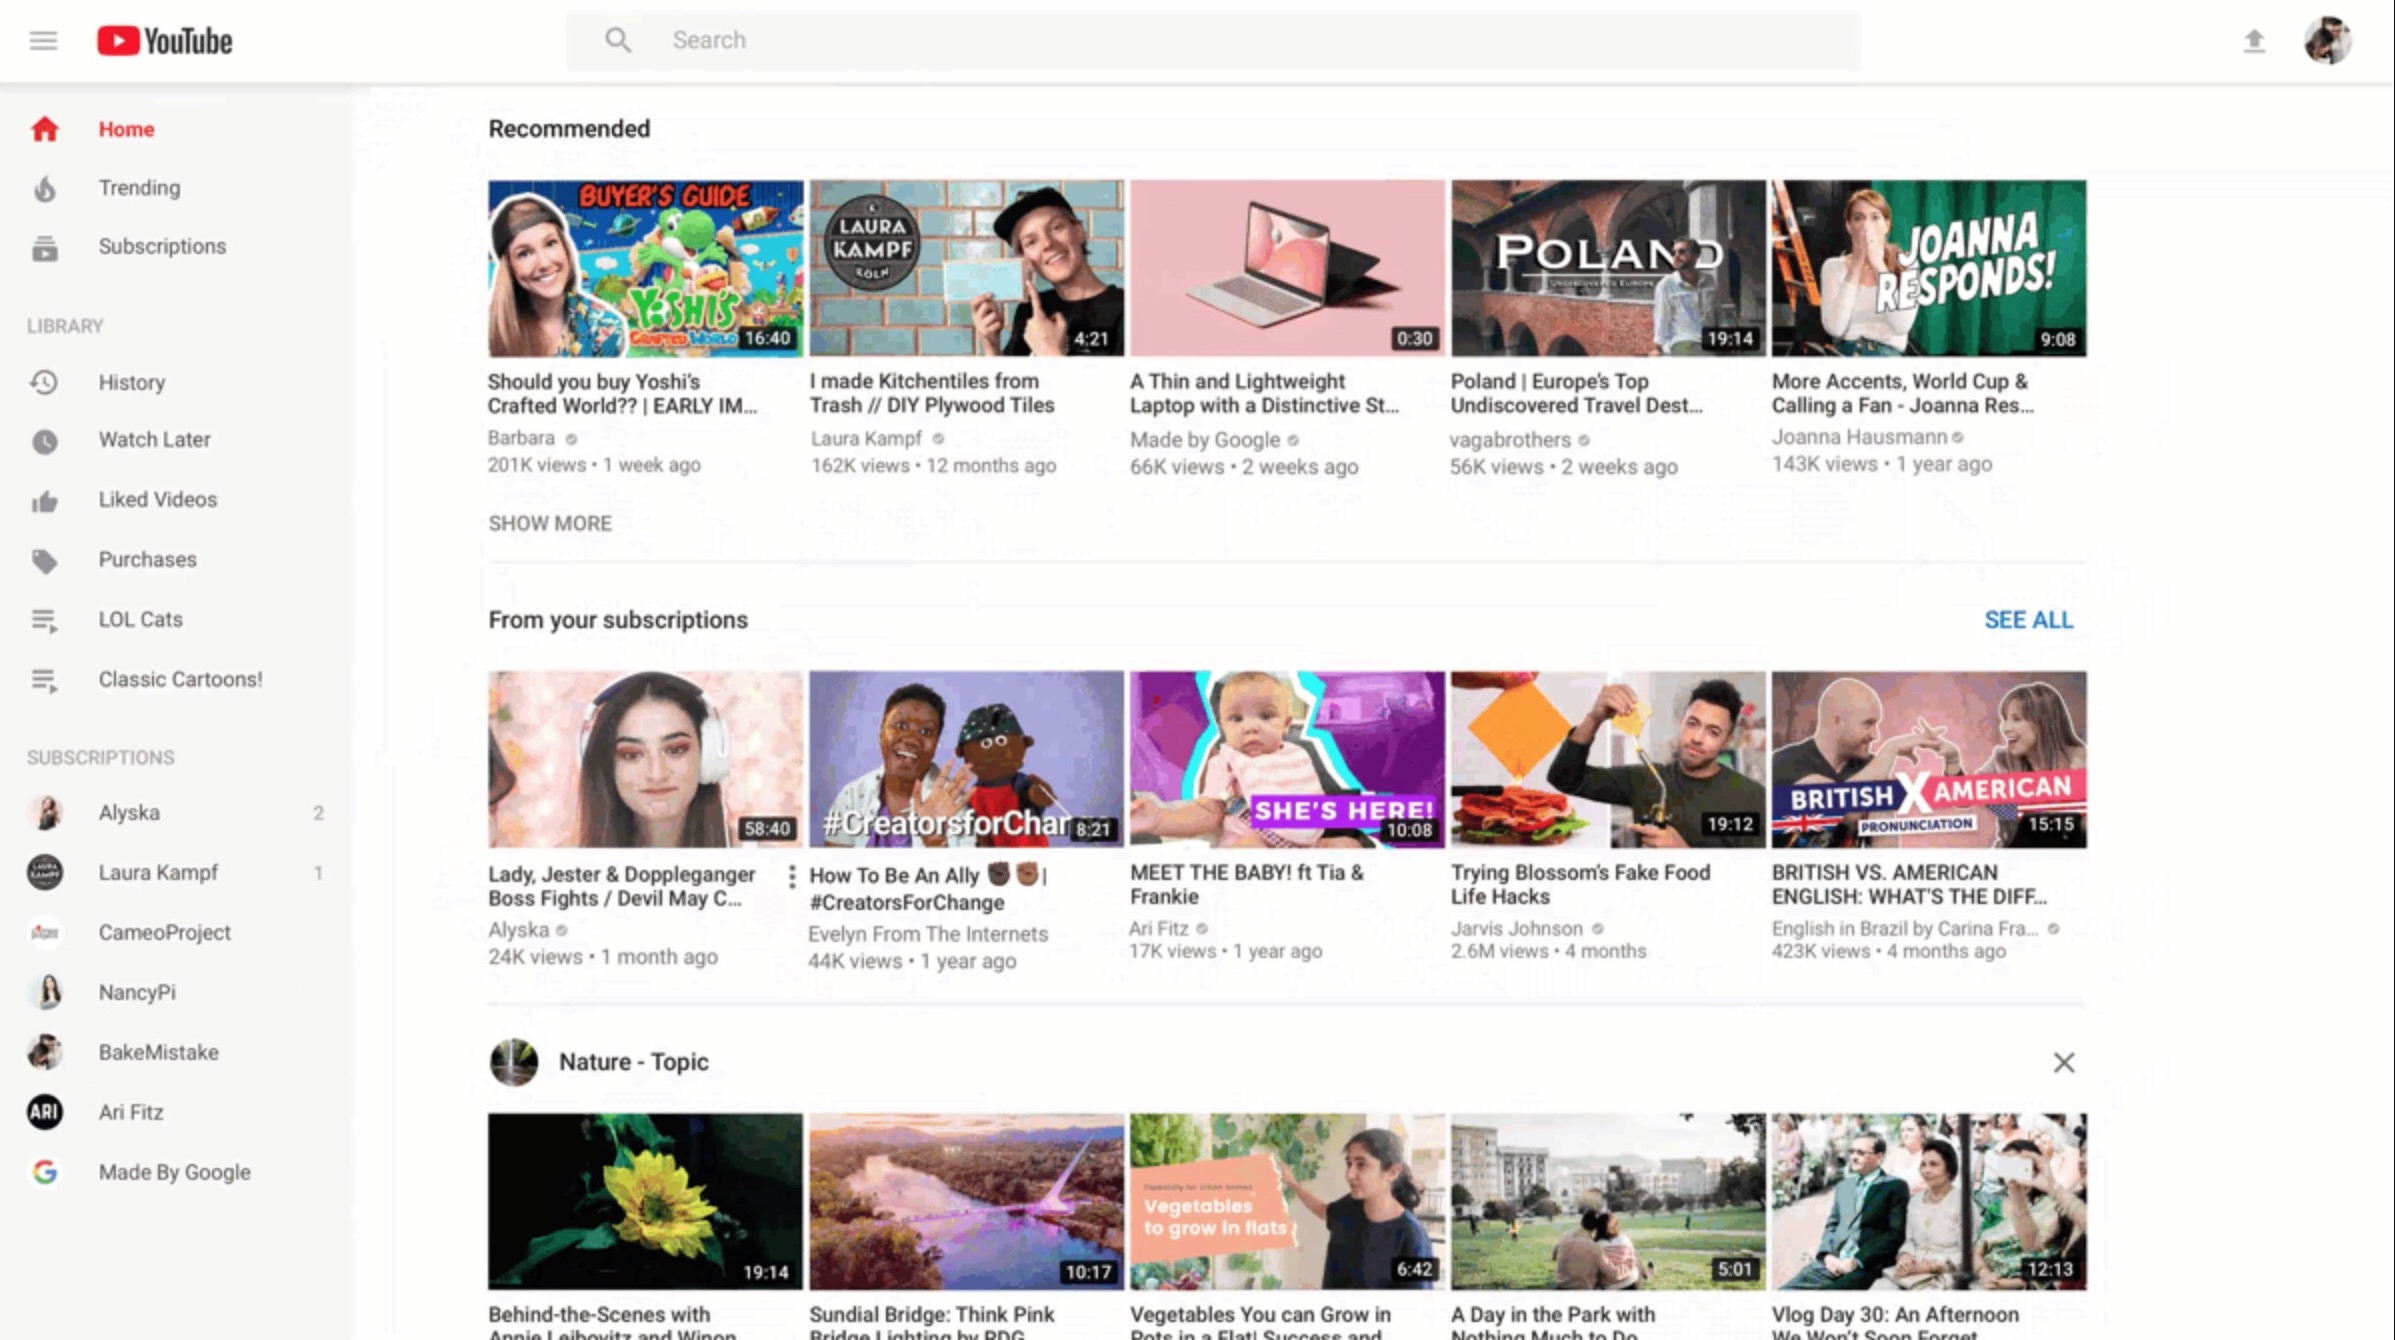 YouTube unveils homepage redesign for desktop web, tablets 9to5Google